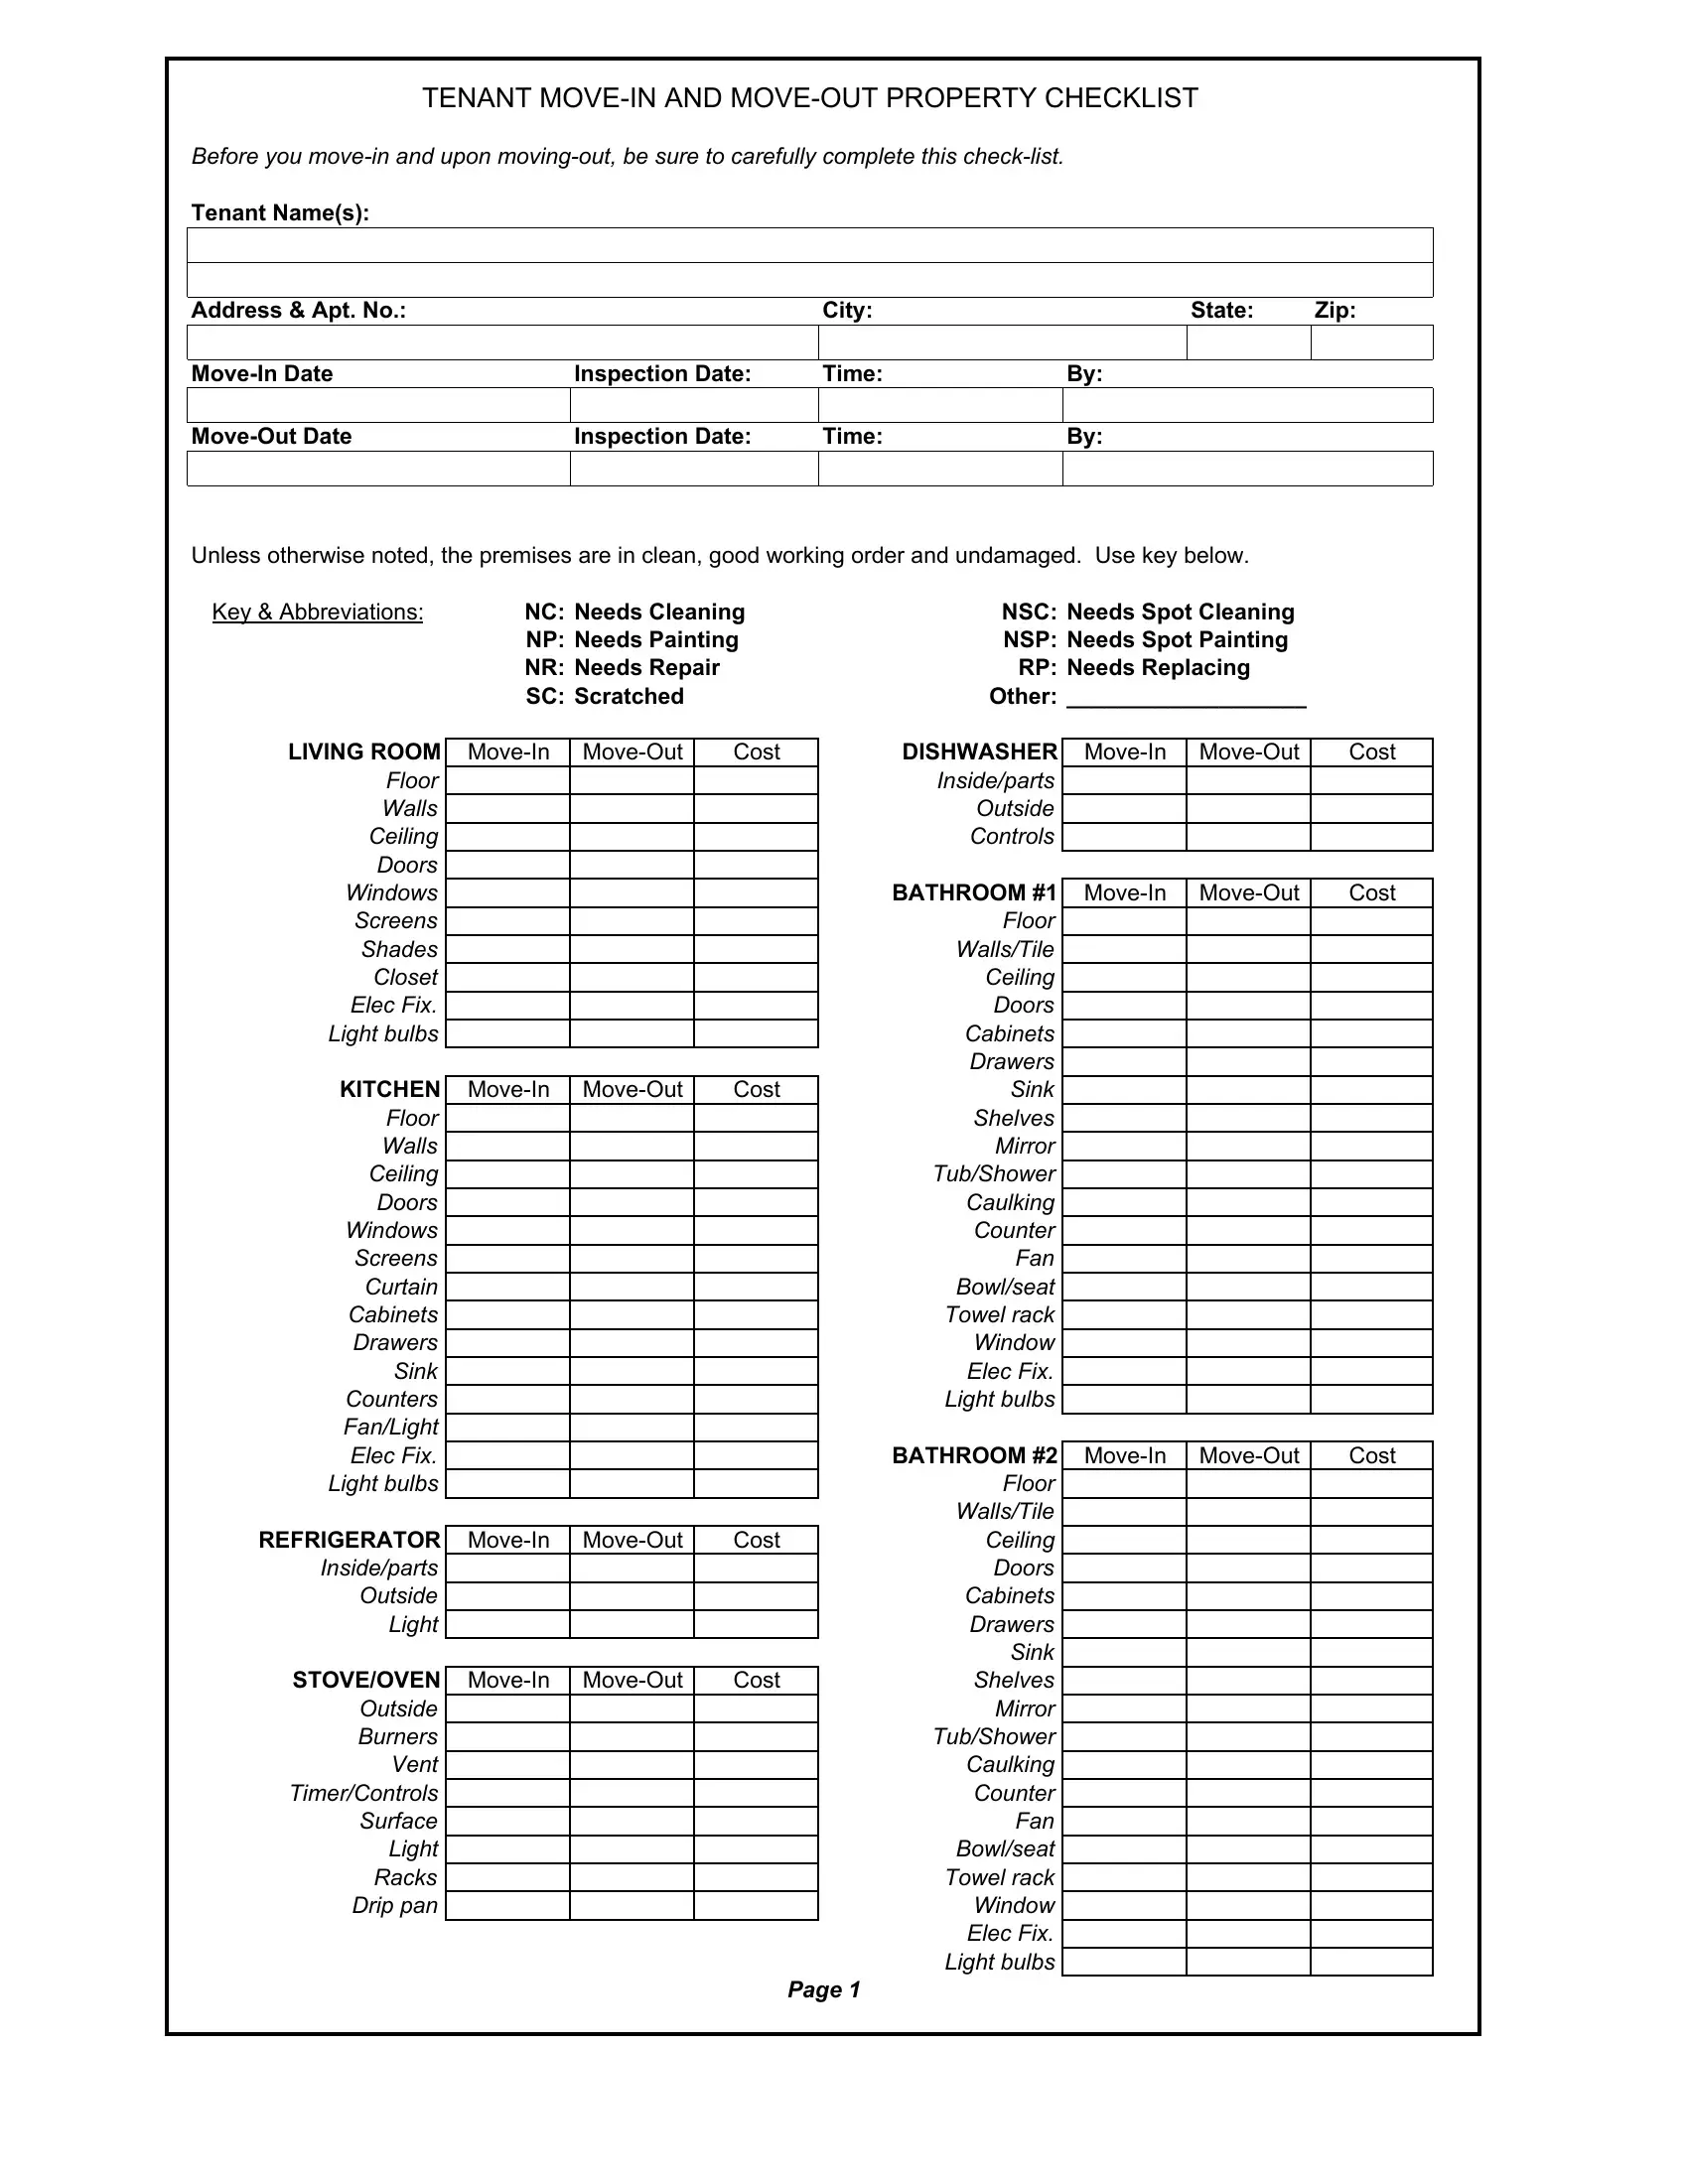 tenant-move-out-checklist-form-fill-out-printable-pdf-forms-online